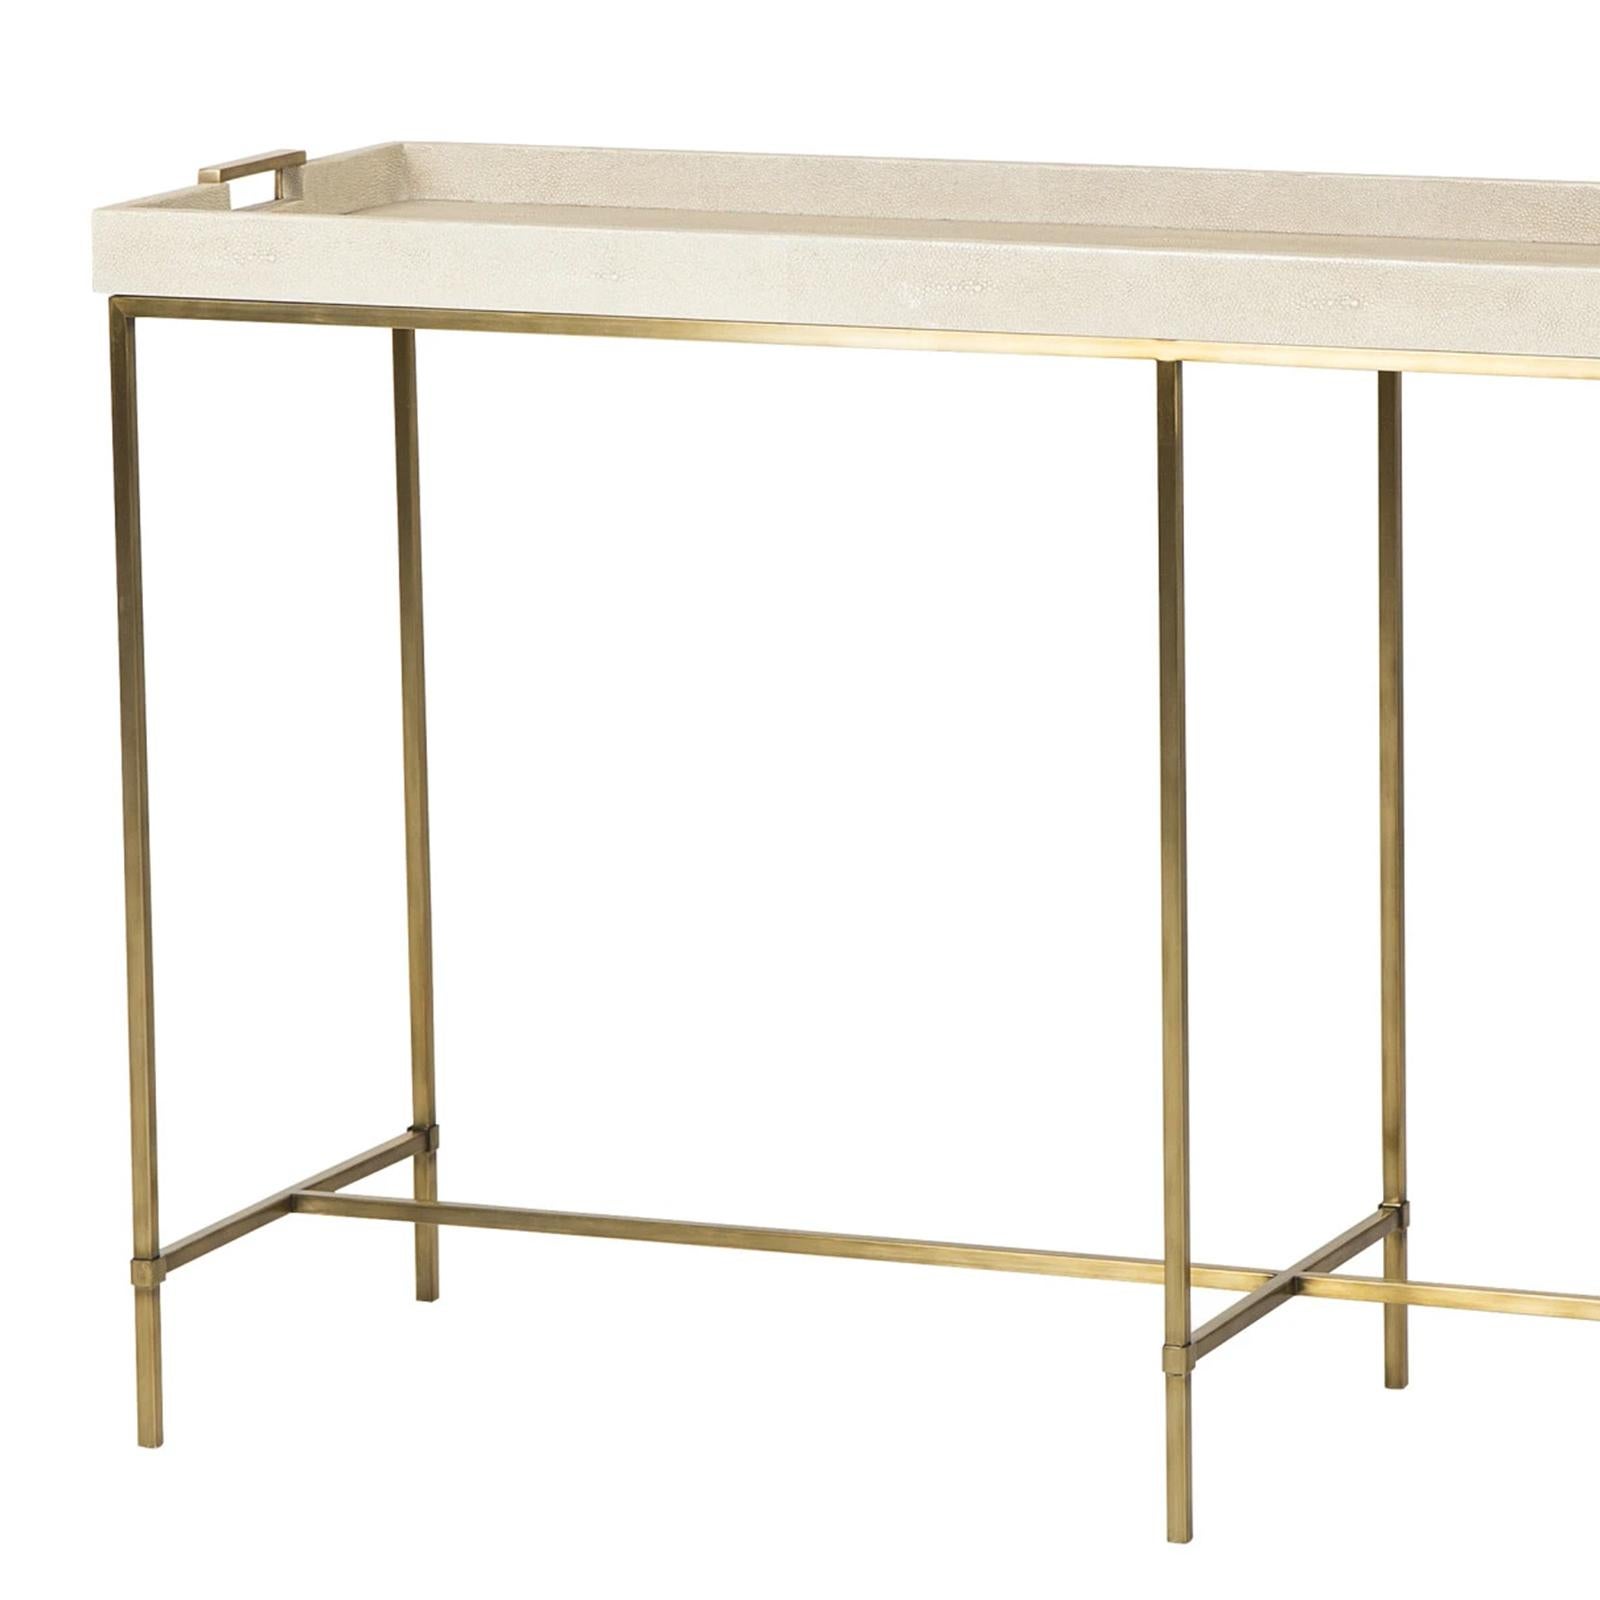 Console table shagry cream with base in stainless steel
 in brass finish. With top in poplar wood covered with 
cream shagreen.